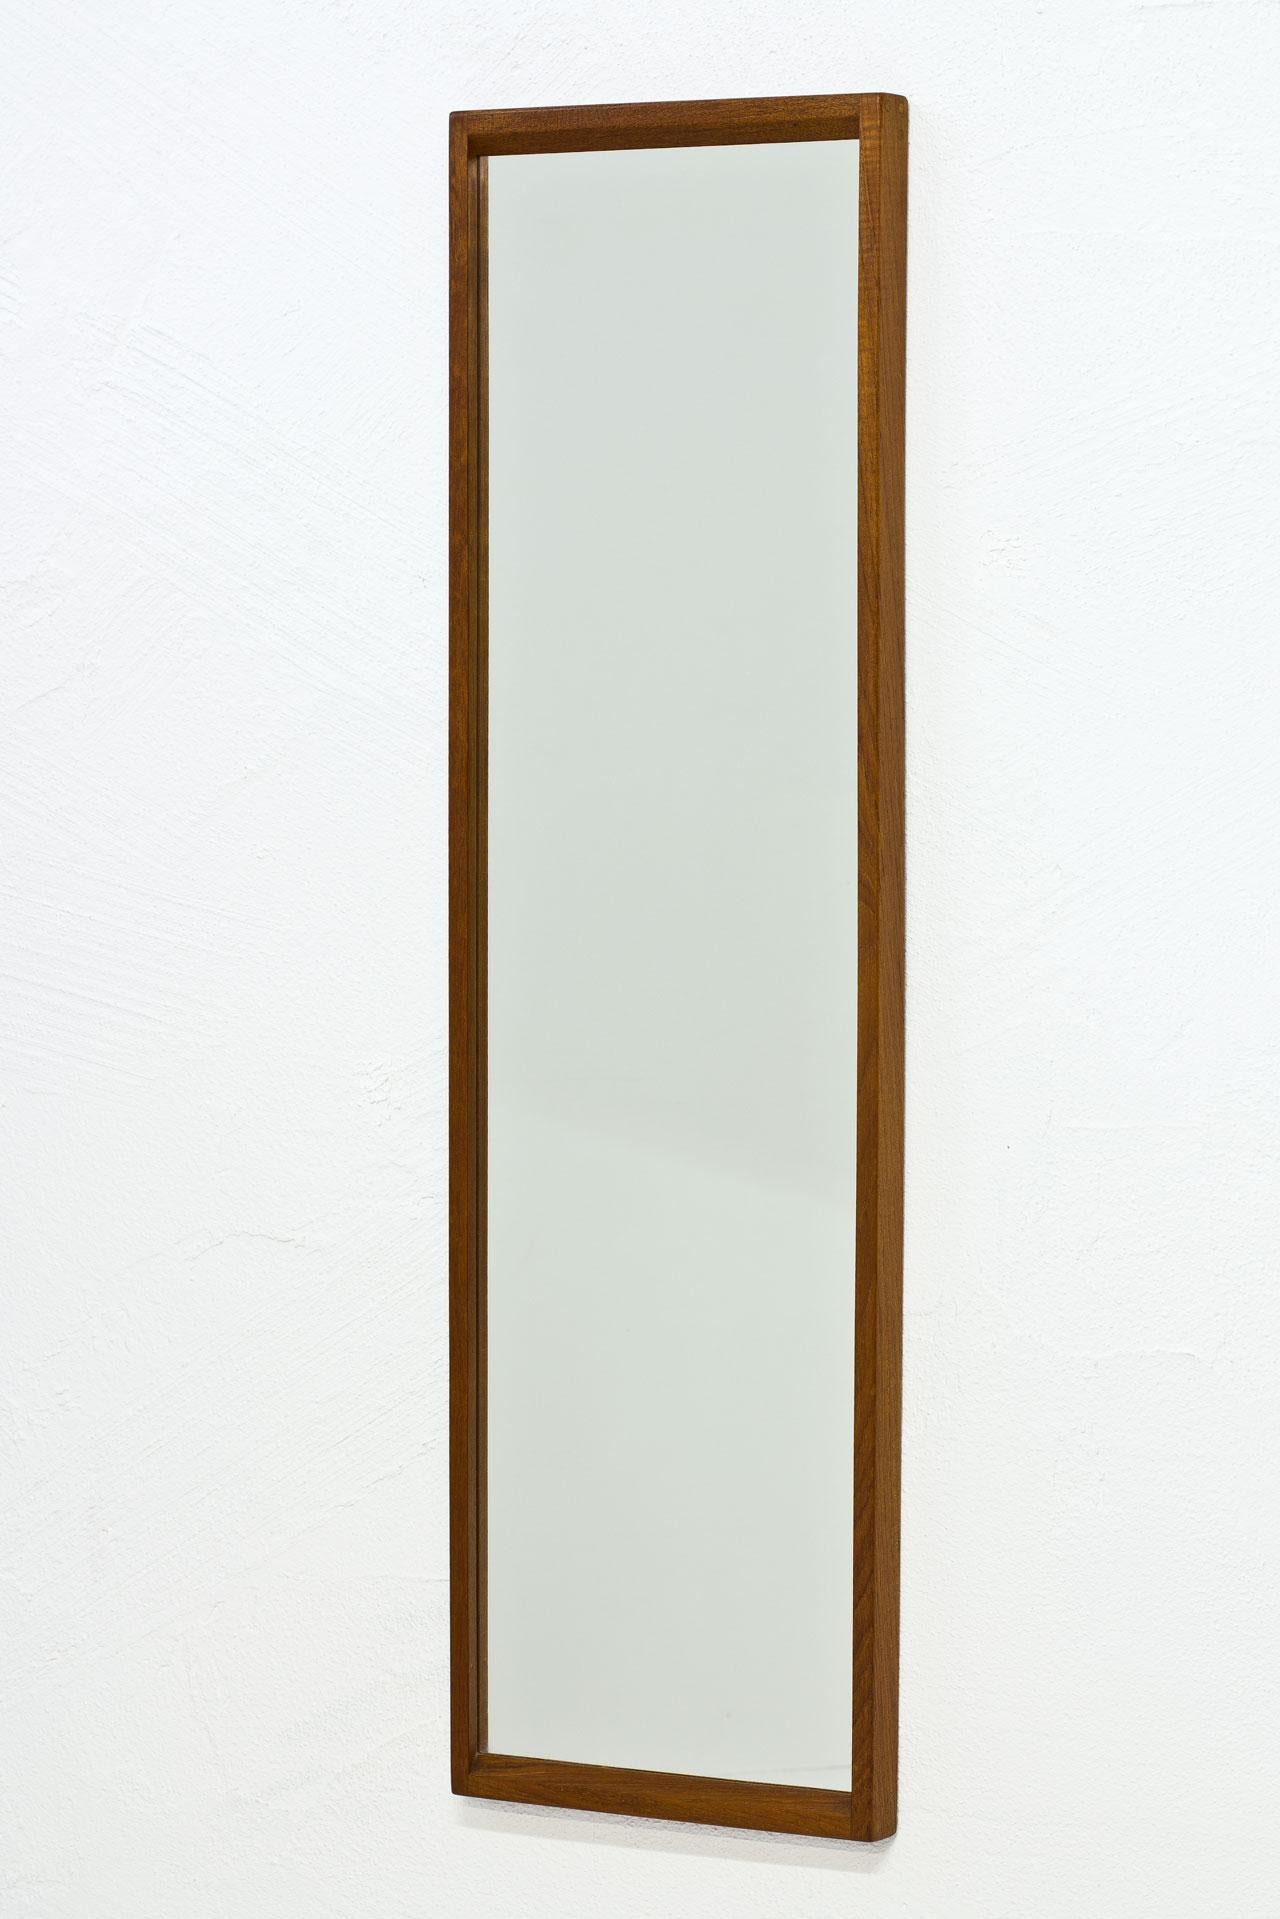 Rectangular wall mirror N° 114 designed by Kai Kristiansen. Produced in Denmark by Aksel Kjersgaard during the 1950s. Solid teak frame. Signed on the back.